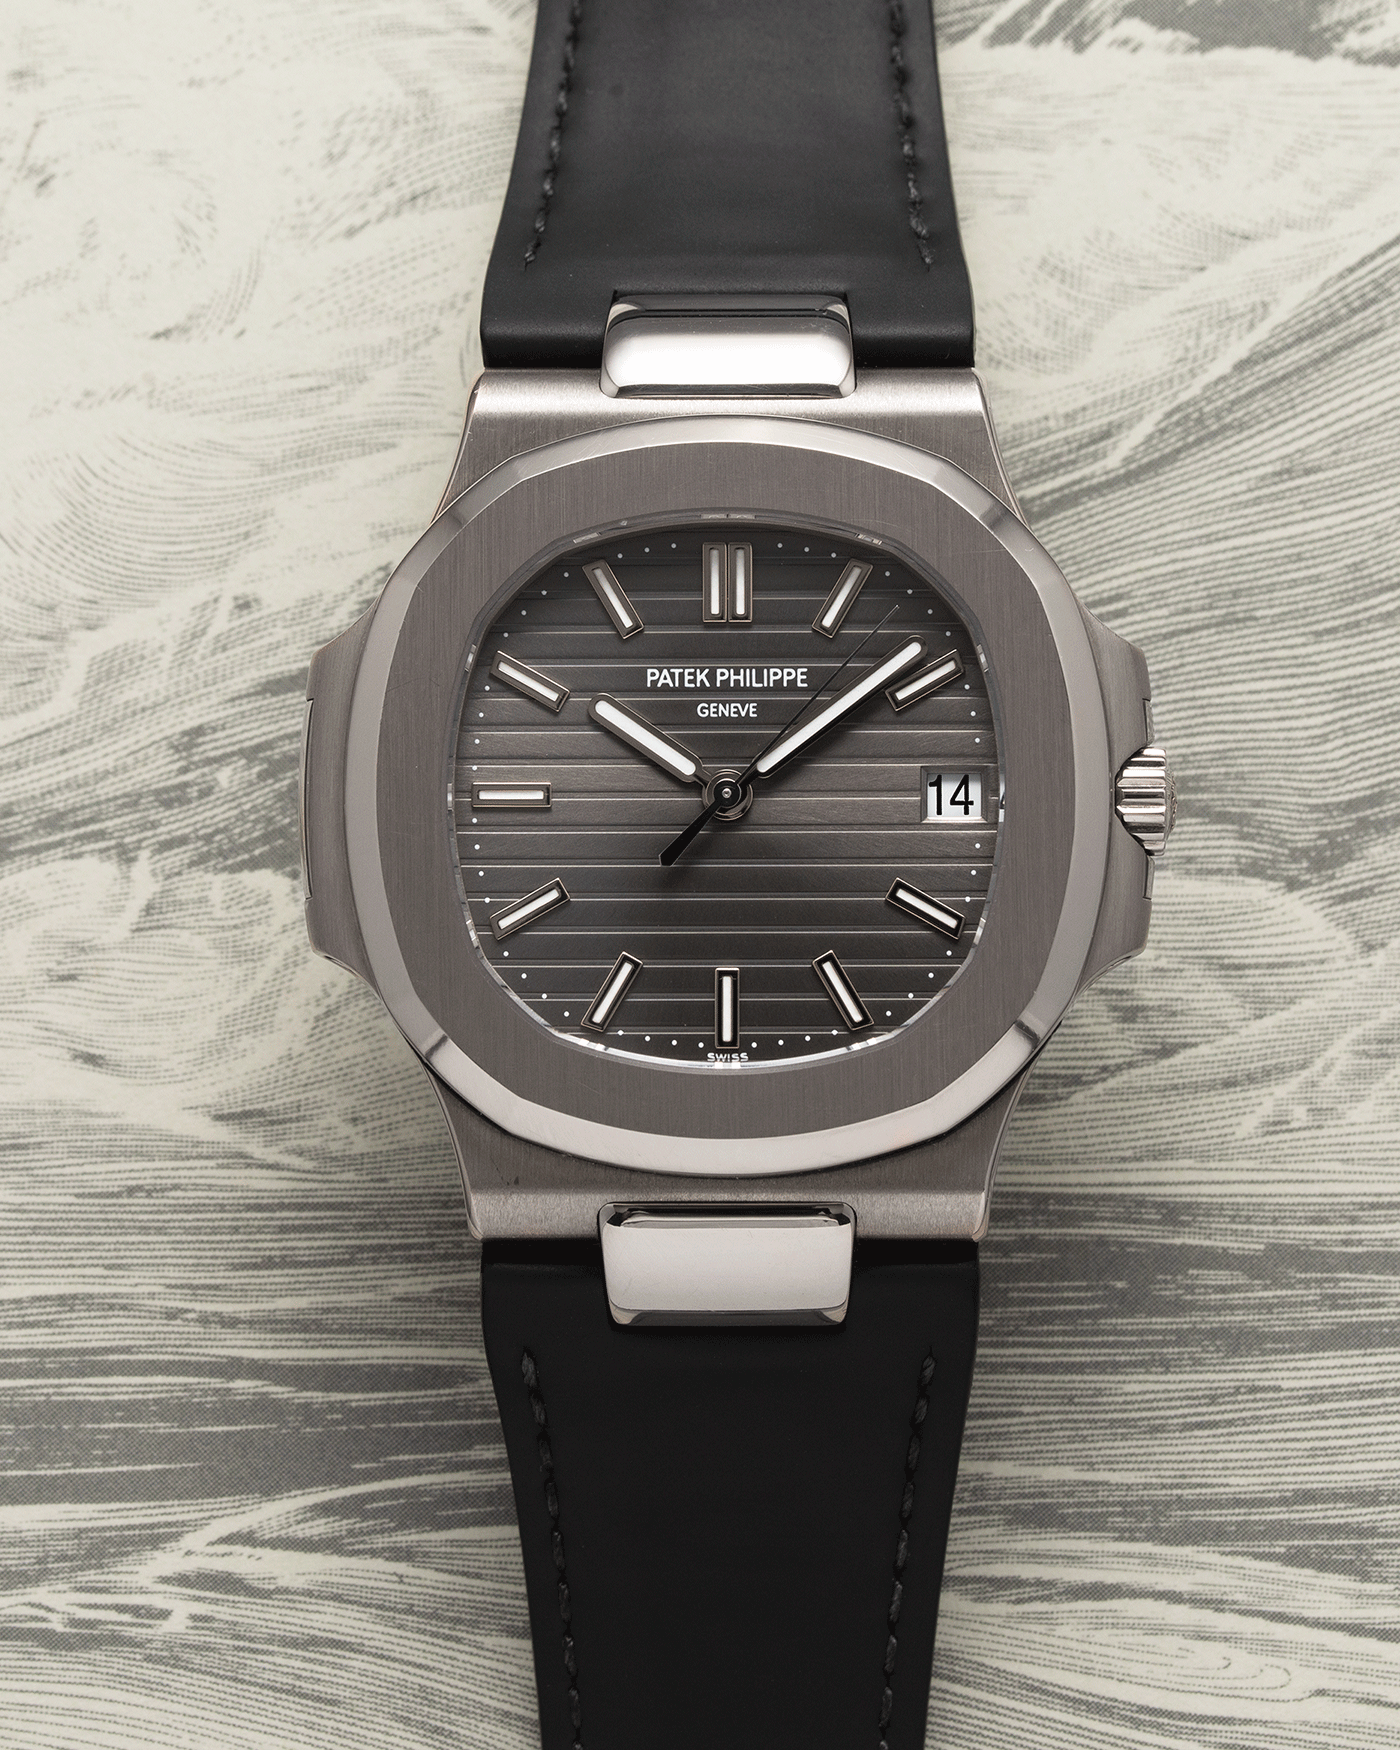 Brand: Patek Philippe Year: 2008 Model: Nautilus Reference Number: 5711G Material:18k White Gold Movement: Calibre 324SC Case Diameter: 40mm Bracelet: Patek Philippe Grey Leather Strap with 18k White Gold Nautilus Deployant